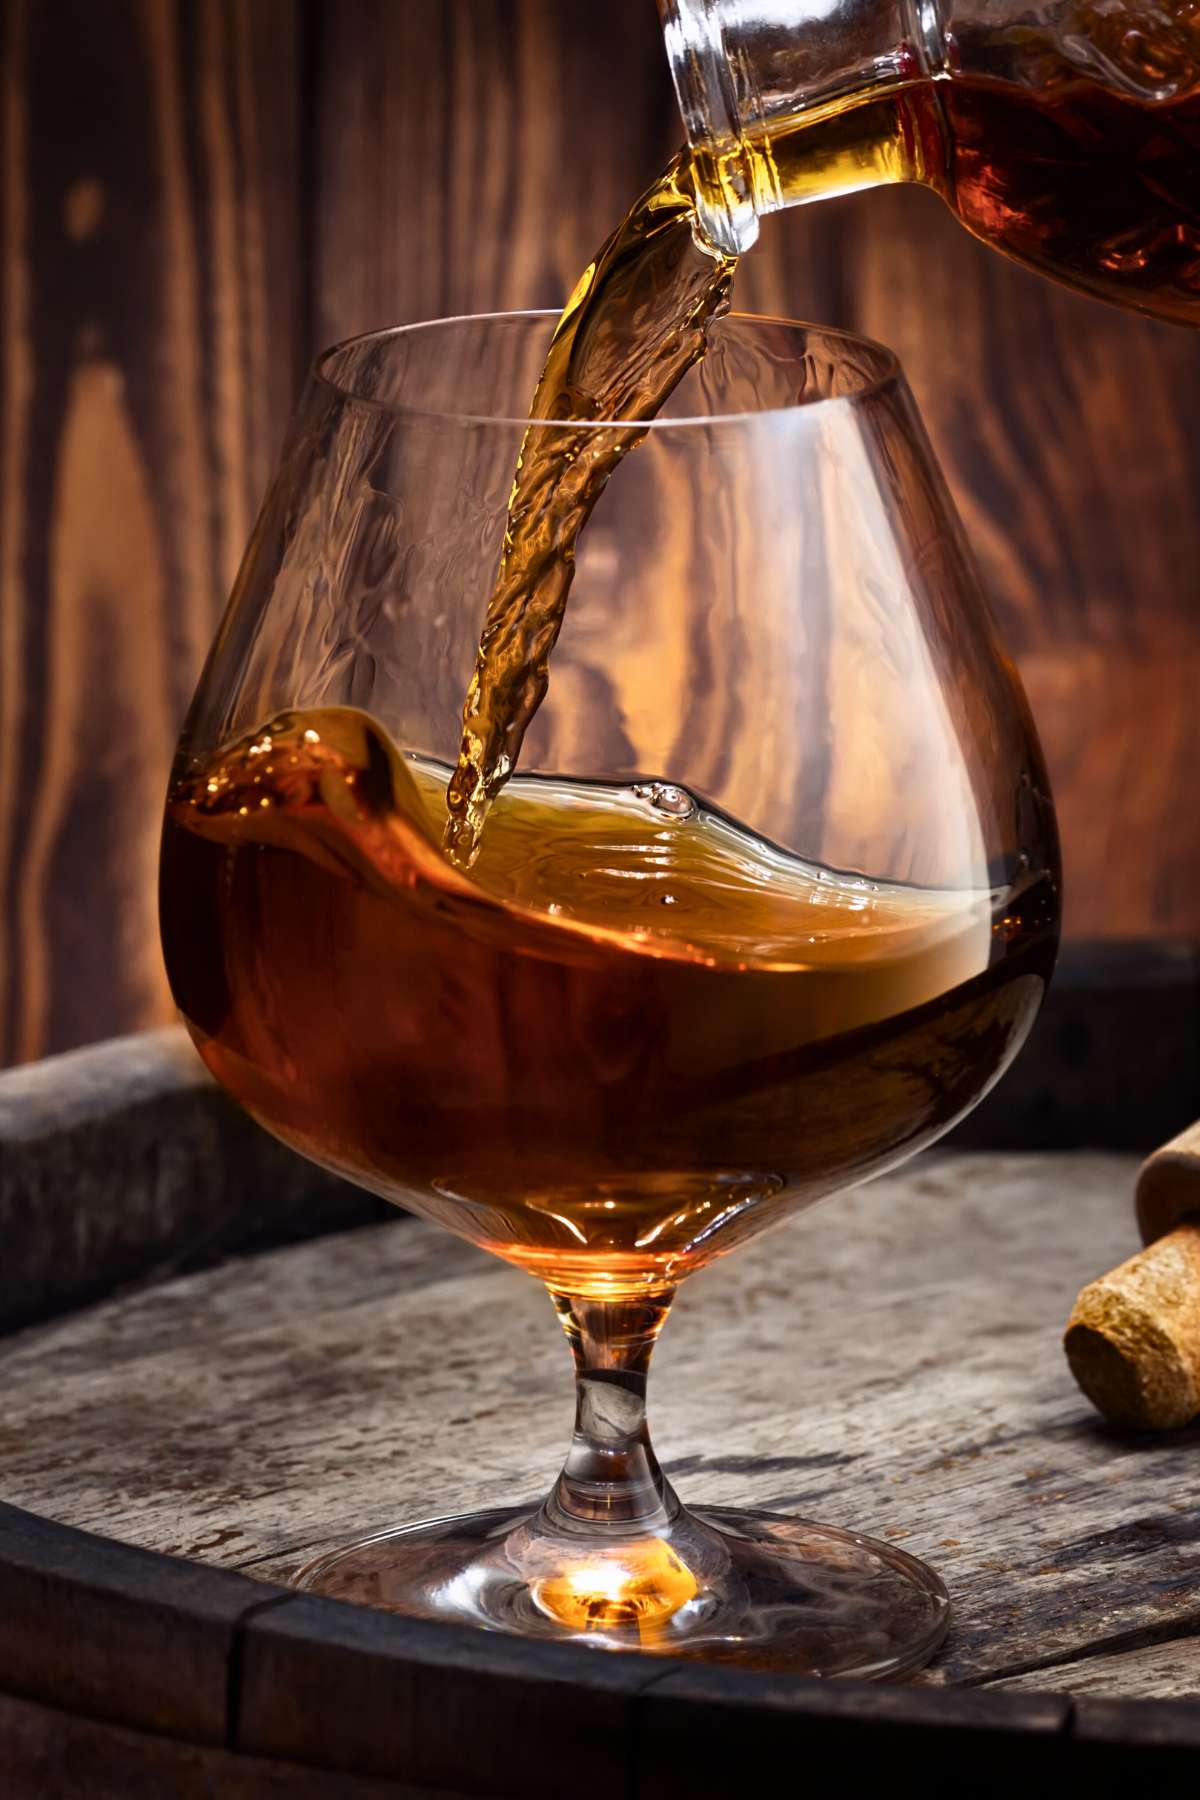 Ever wonder what a drink neat means? When it comes to enjoying a fine beverage, there are various ways to enjoy its flavors and complexities. One such method is drinking it neat, which has its own unique significance in the world of spirits.